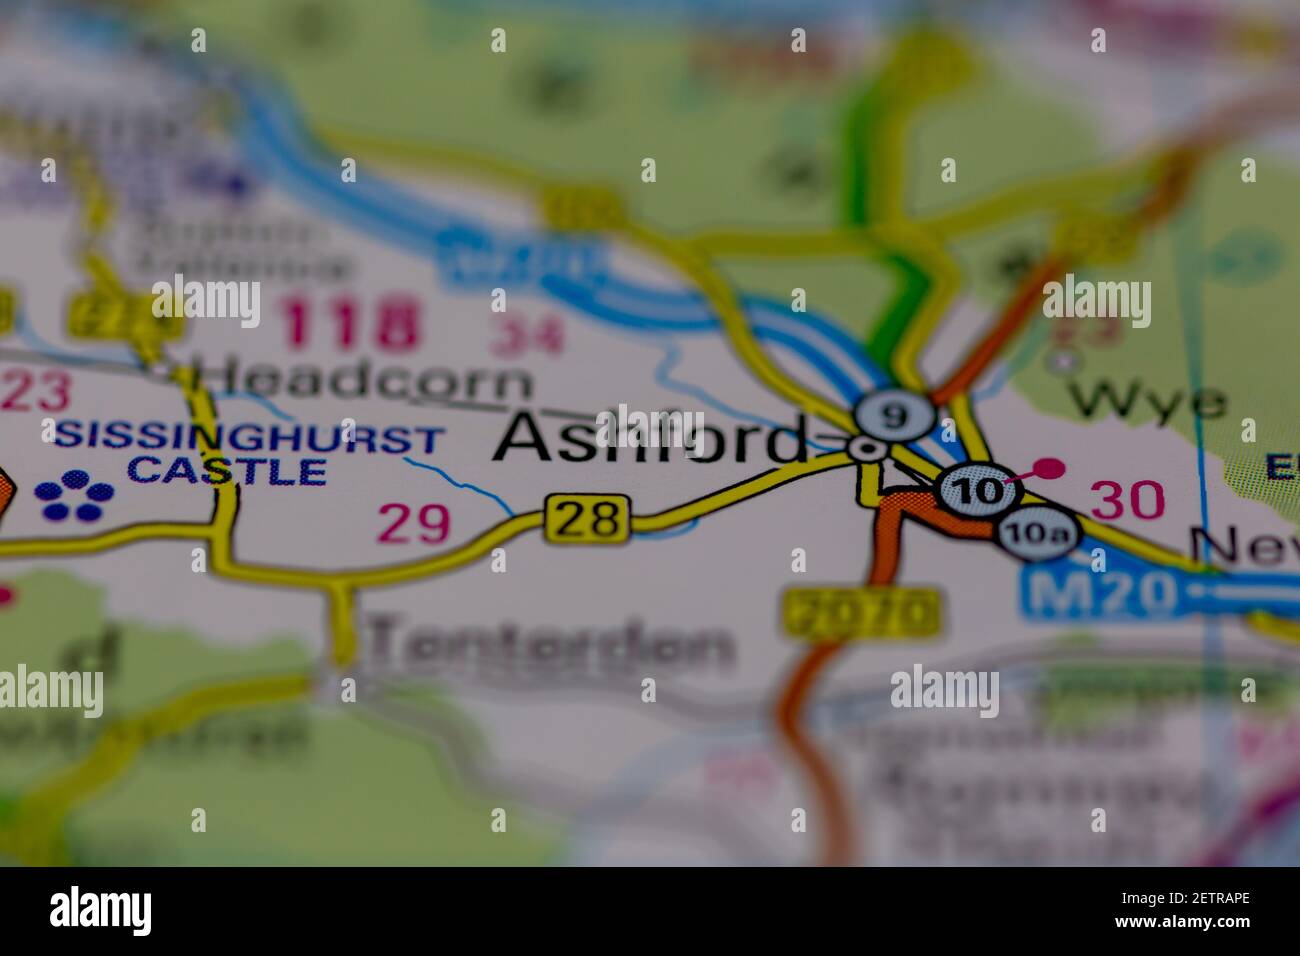 Ashford Shown on a road map or Geography map and atlas Stock Photo